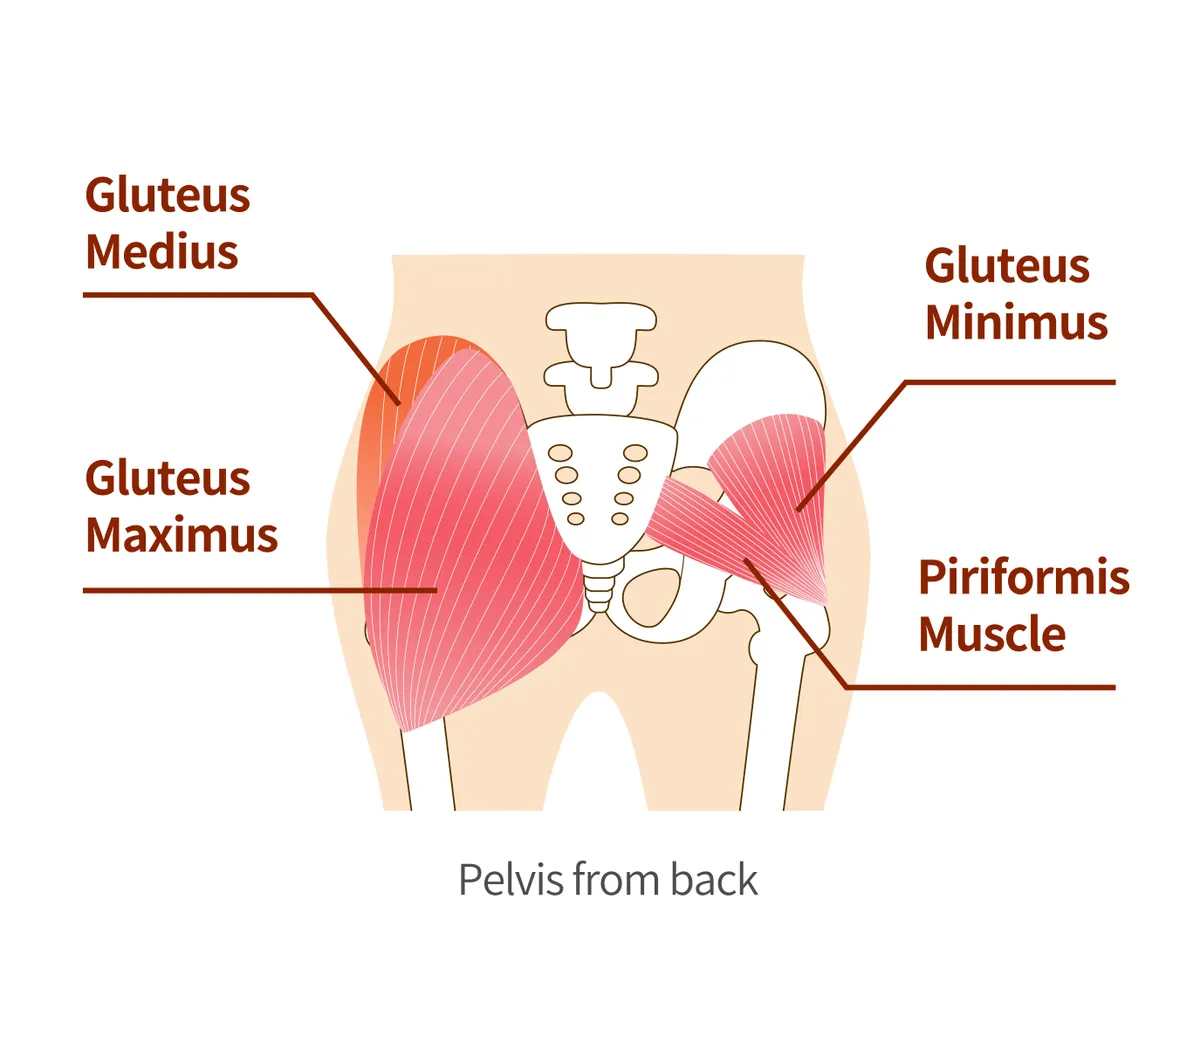 Main gluteal muscles of the buttocks: large gluteus medius, gluteus medius muscle, small gluteus muscle